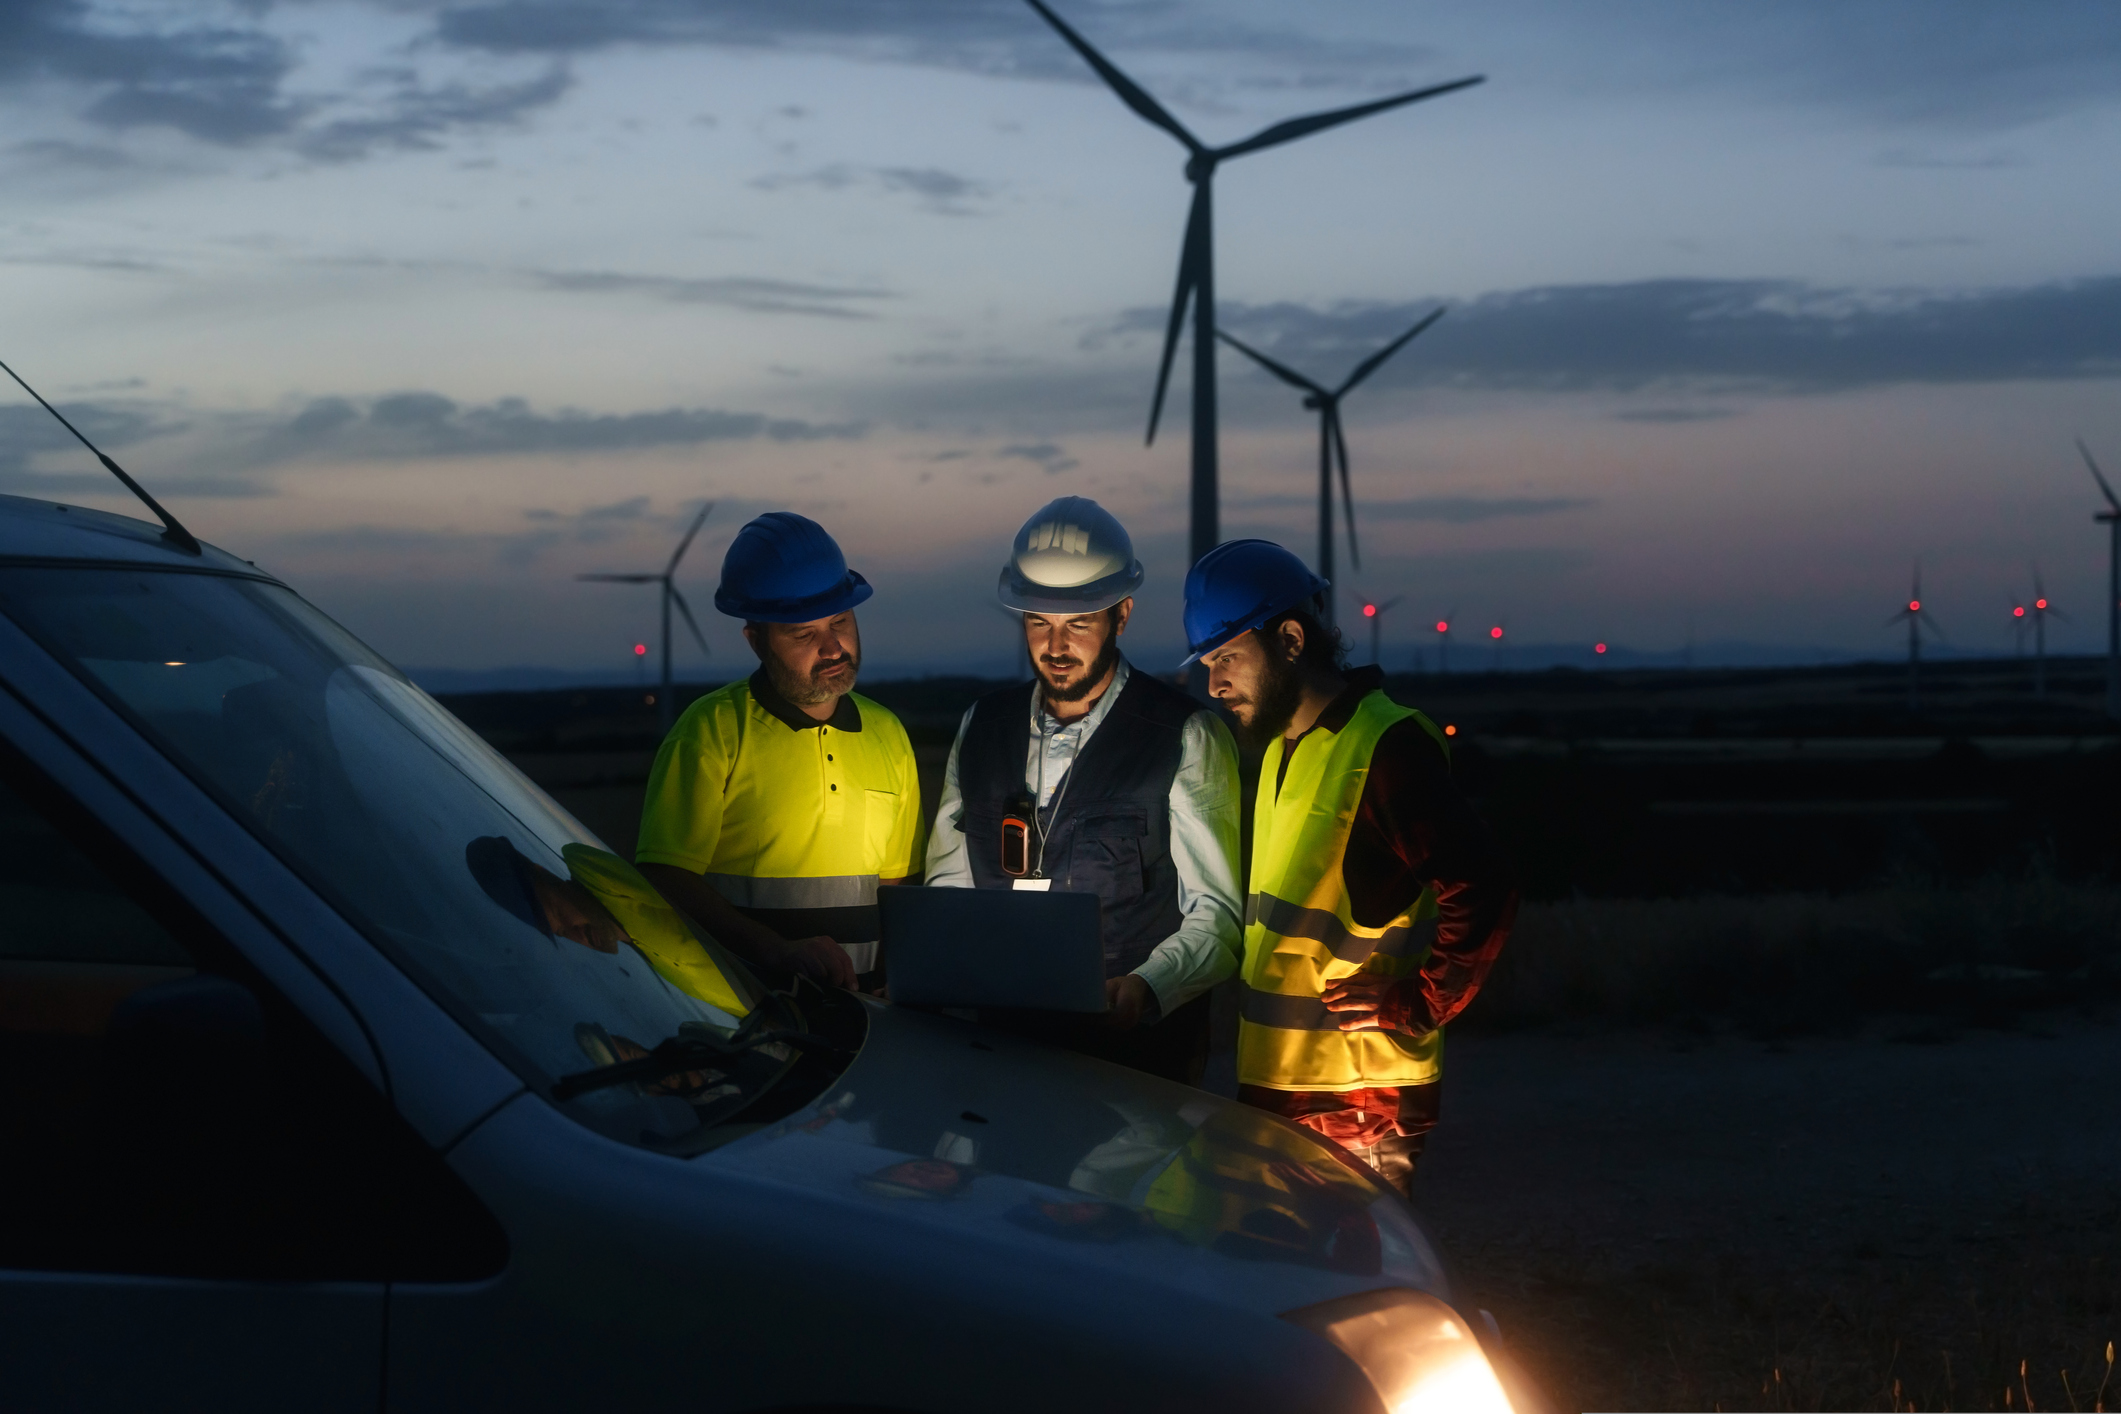 Engineers in safety vests and helmets discussing renewable energy solutions on a laptop at a wind turbine electricity plant during twilight